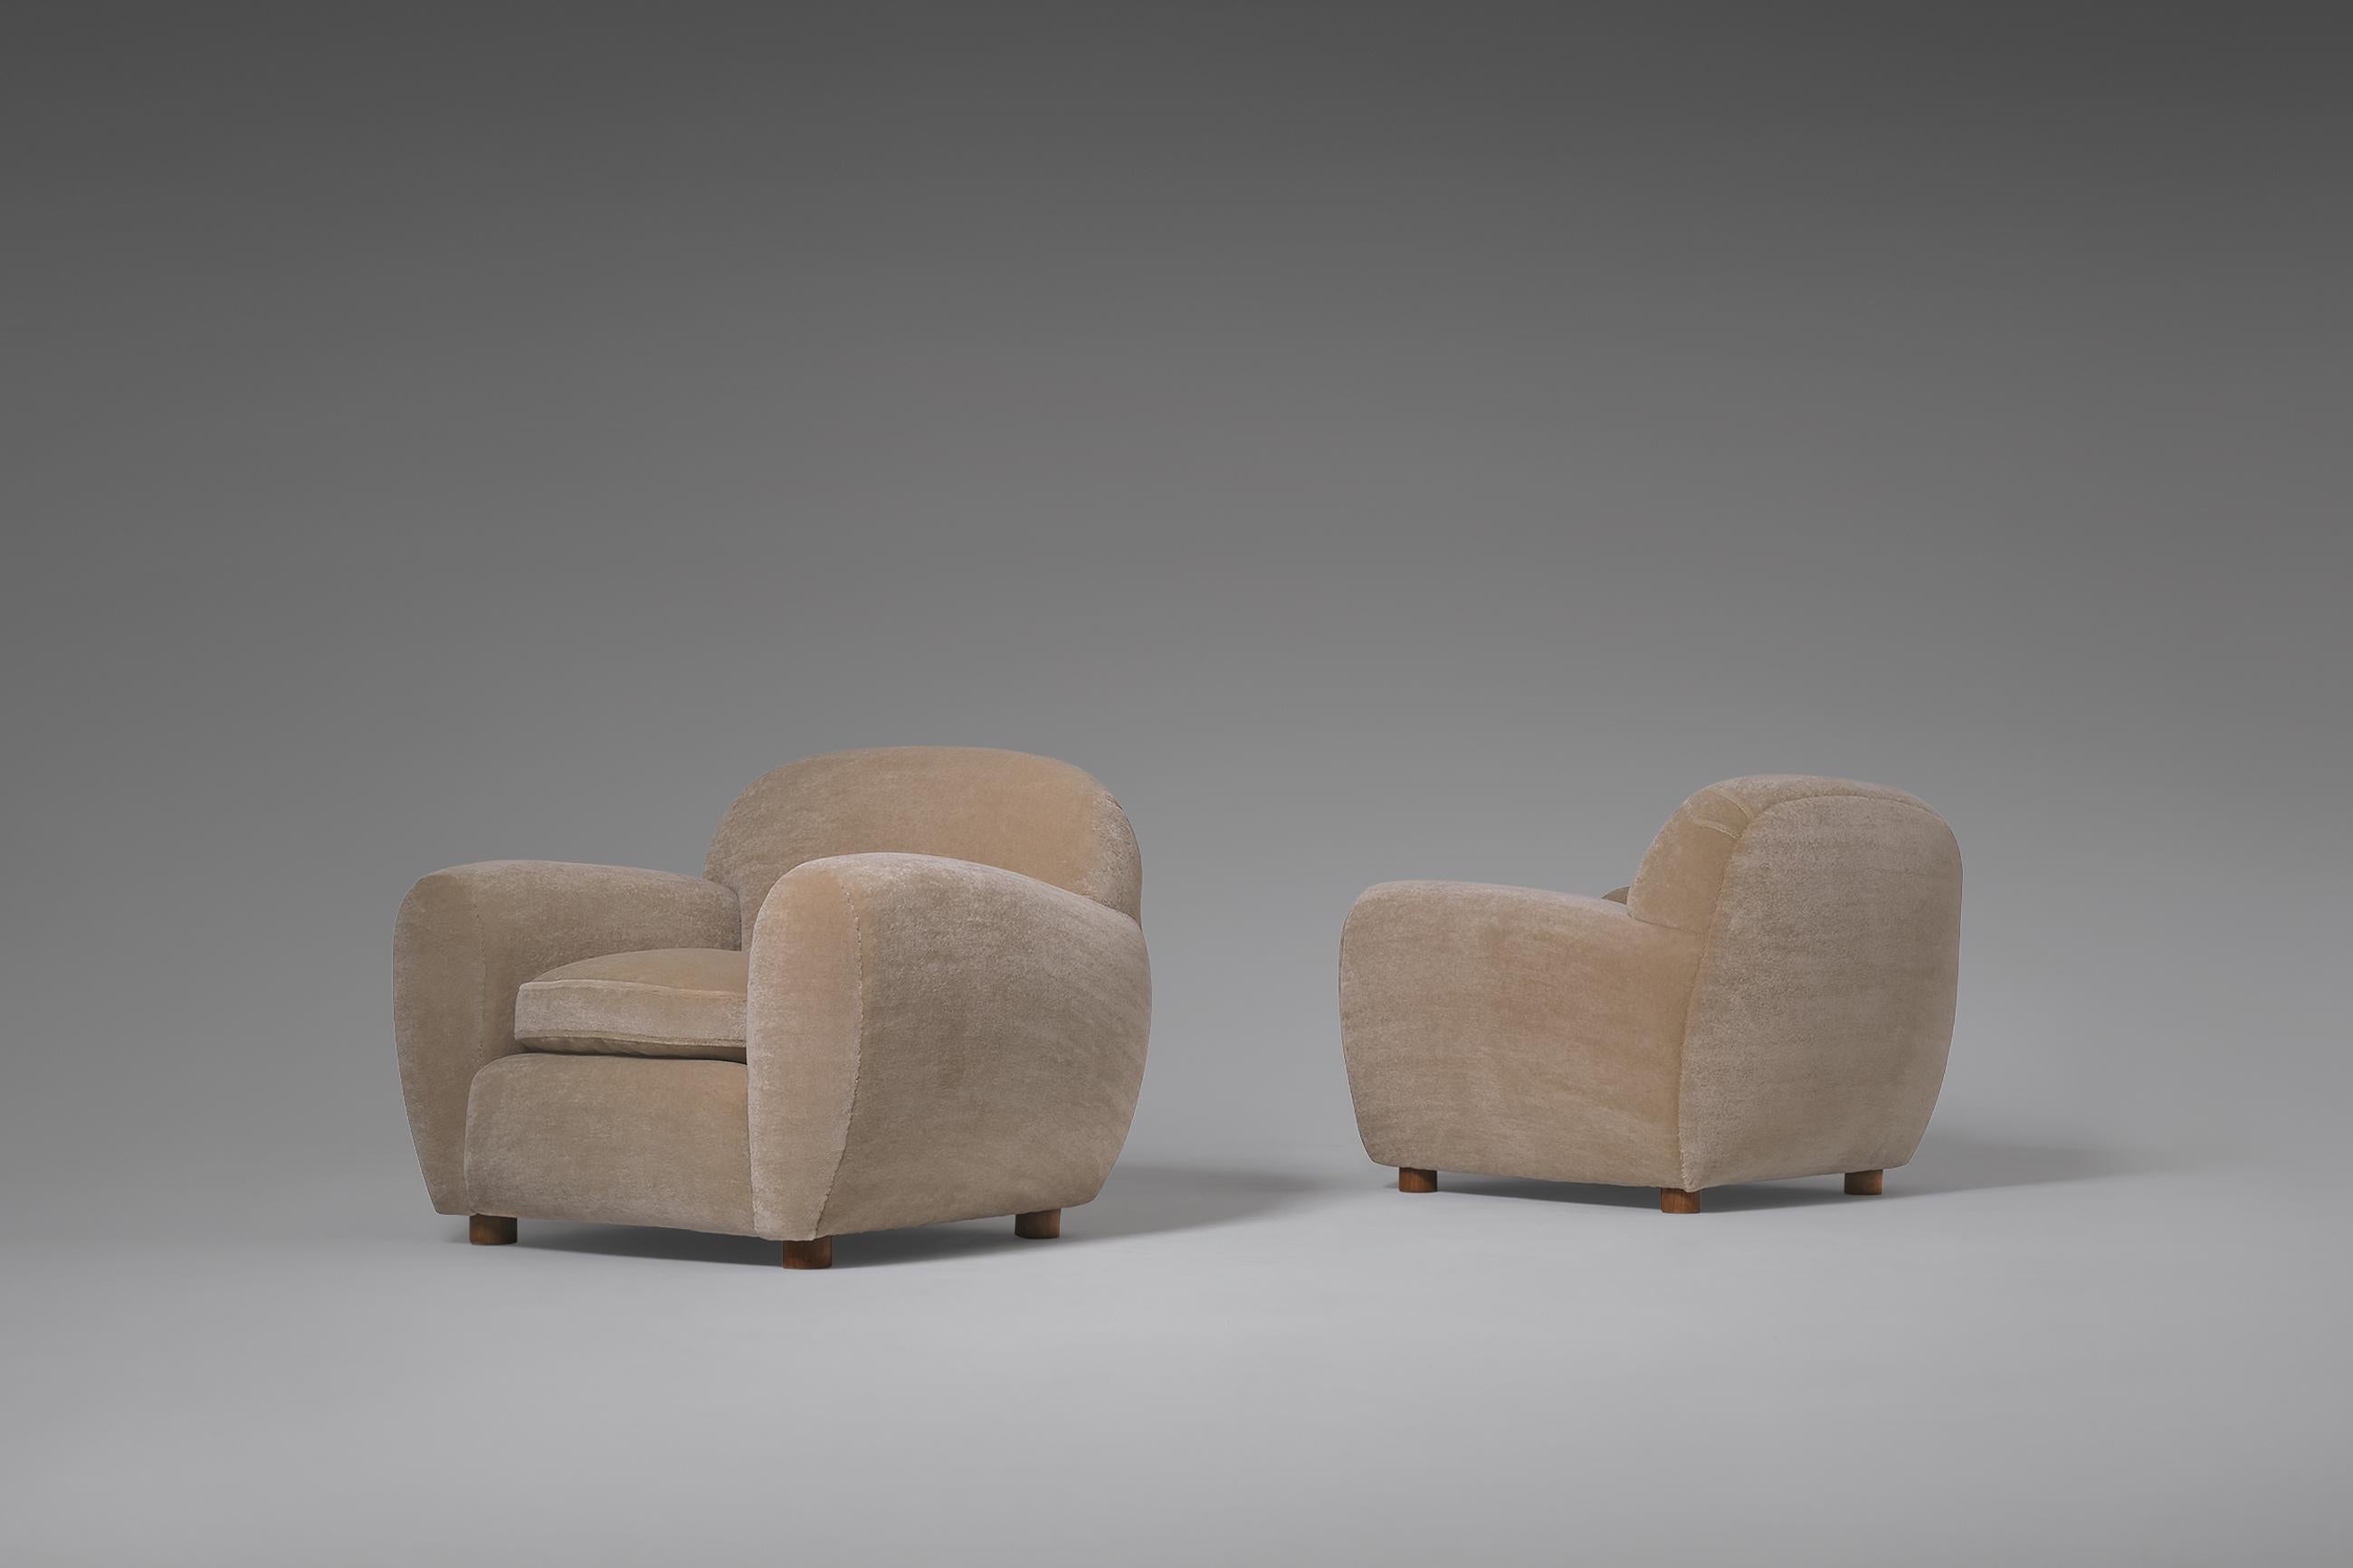 Stunning pair of lounge chairs in the style of Jean Royère, early 1950's. Impressive heavy curved shapes and line play with nice cilinder shaped Oak wooden legs. Unfortunately we haven't find the designer but these chairs are absolutely of top